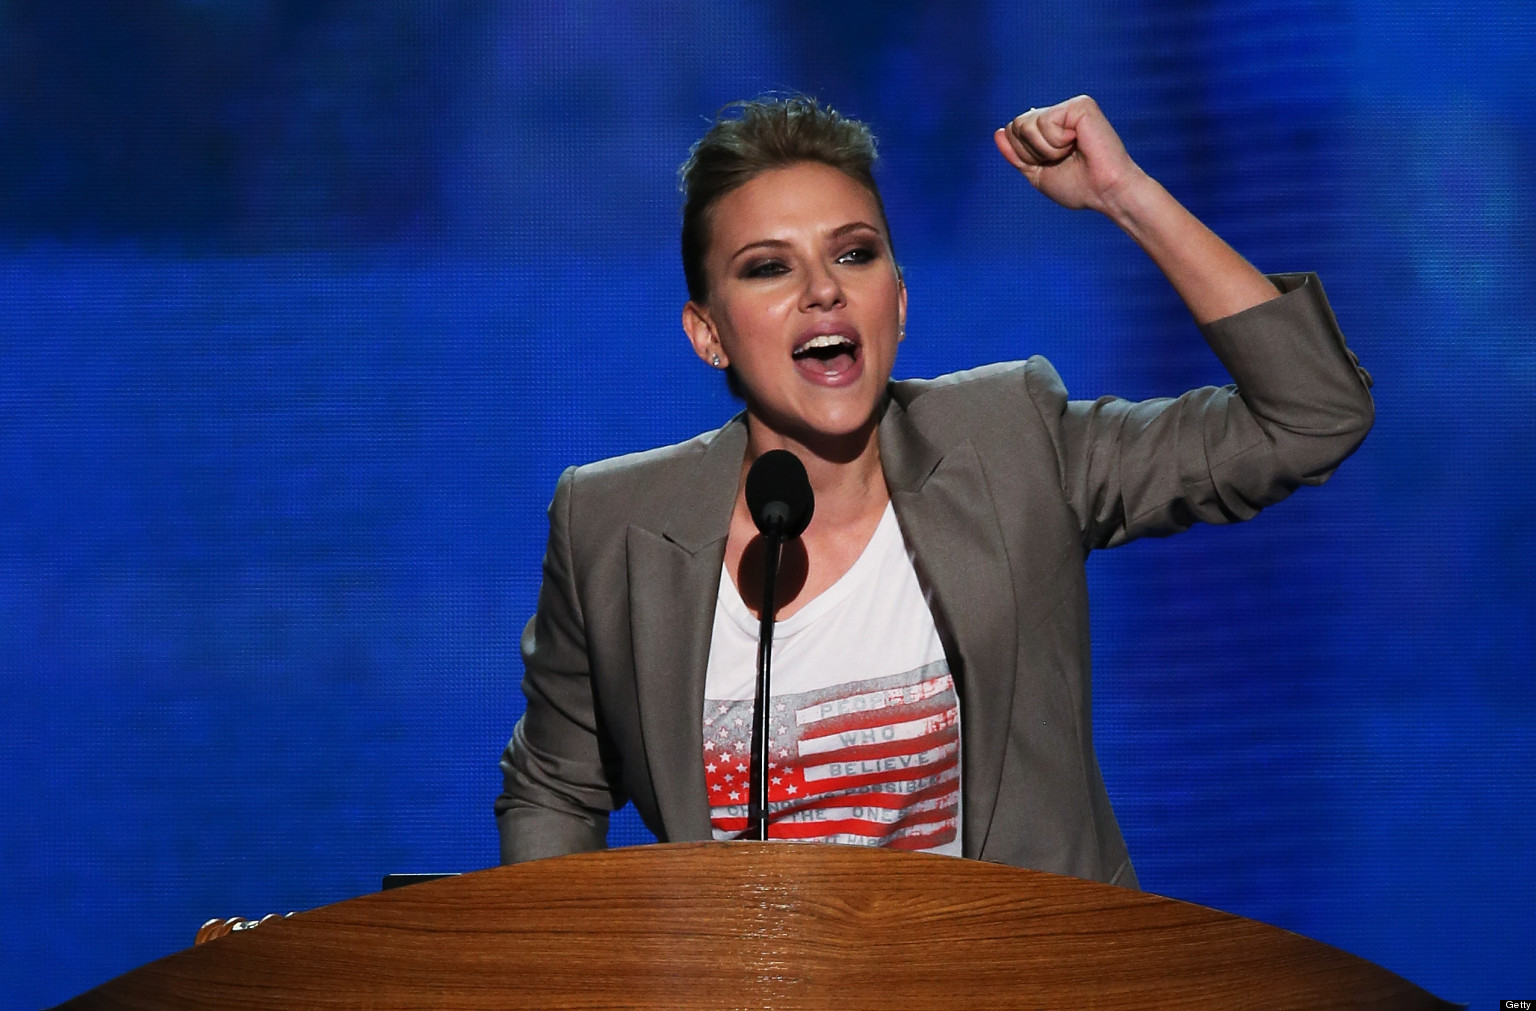 Scarlett Johansson Speech At 2012 Democratic National Convention Calls Young Americans ...1536 x 1011